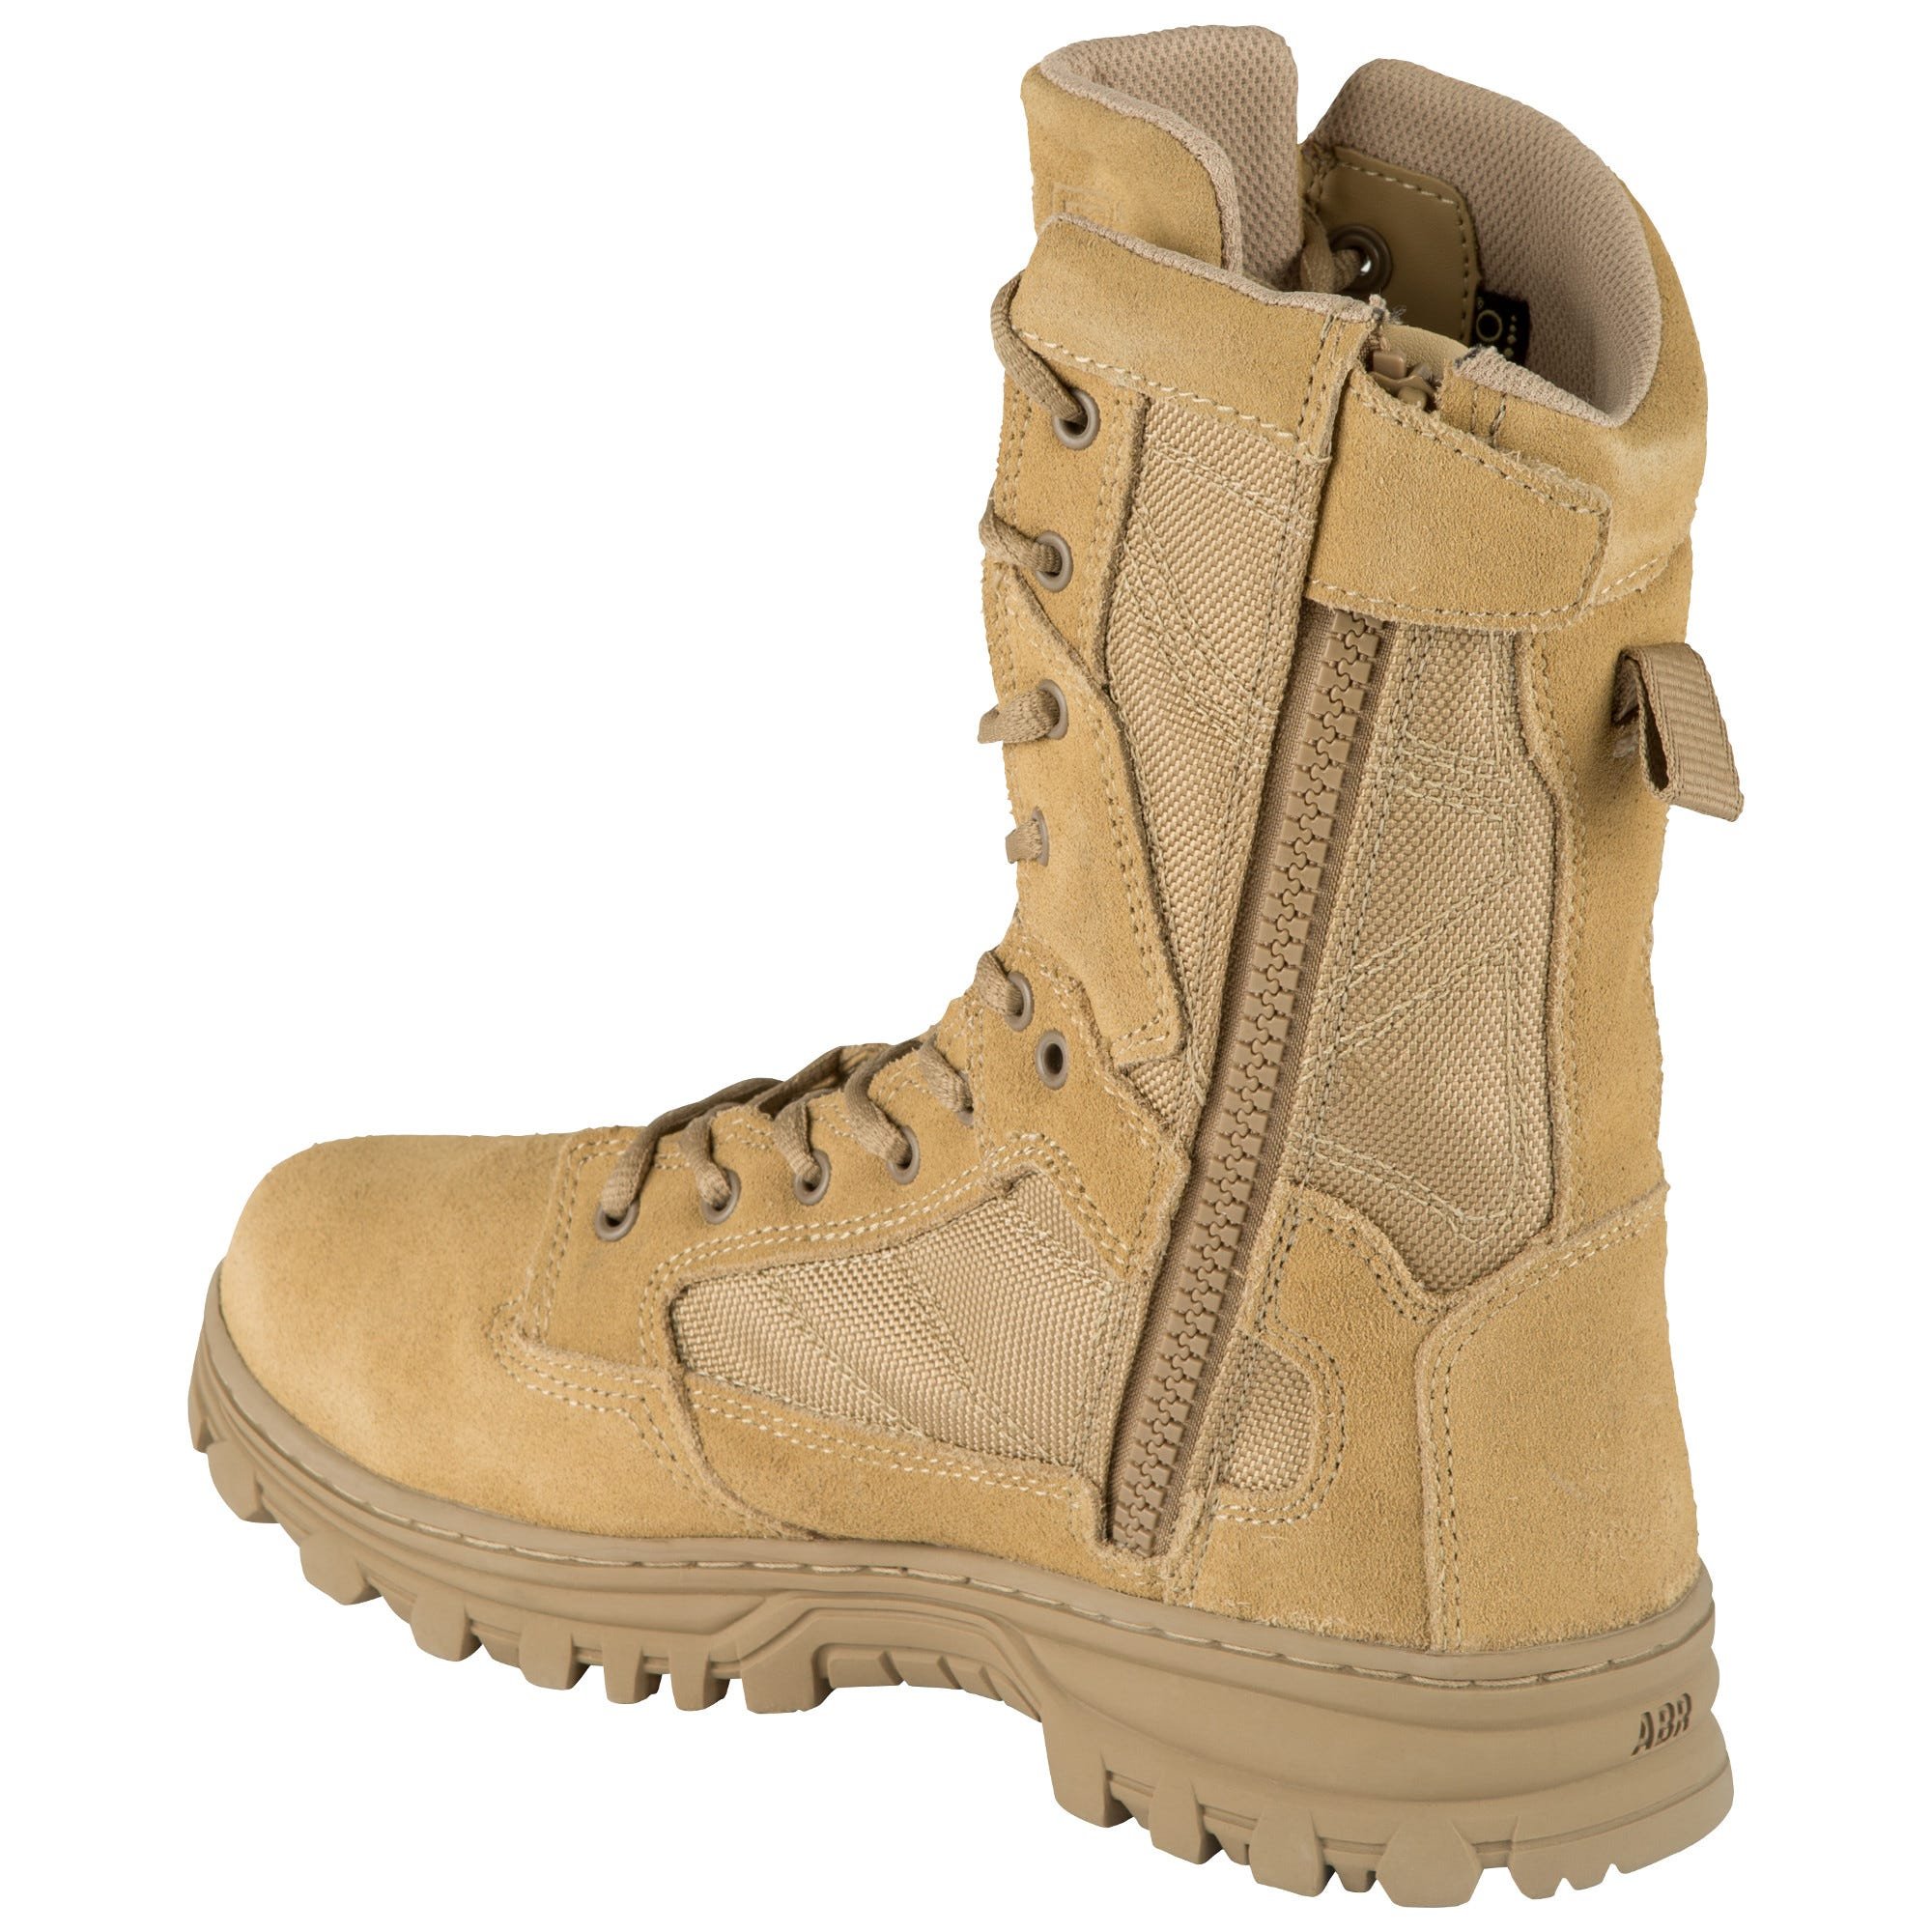 5.11 Work Gear EVO 8-Inch Waterproof Boots, Oil/Slip-Resistant, OrthoLite Insole, Coyote, 6.5/Regular, Style 12347 - image 2 of 4